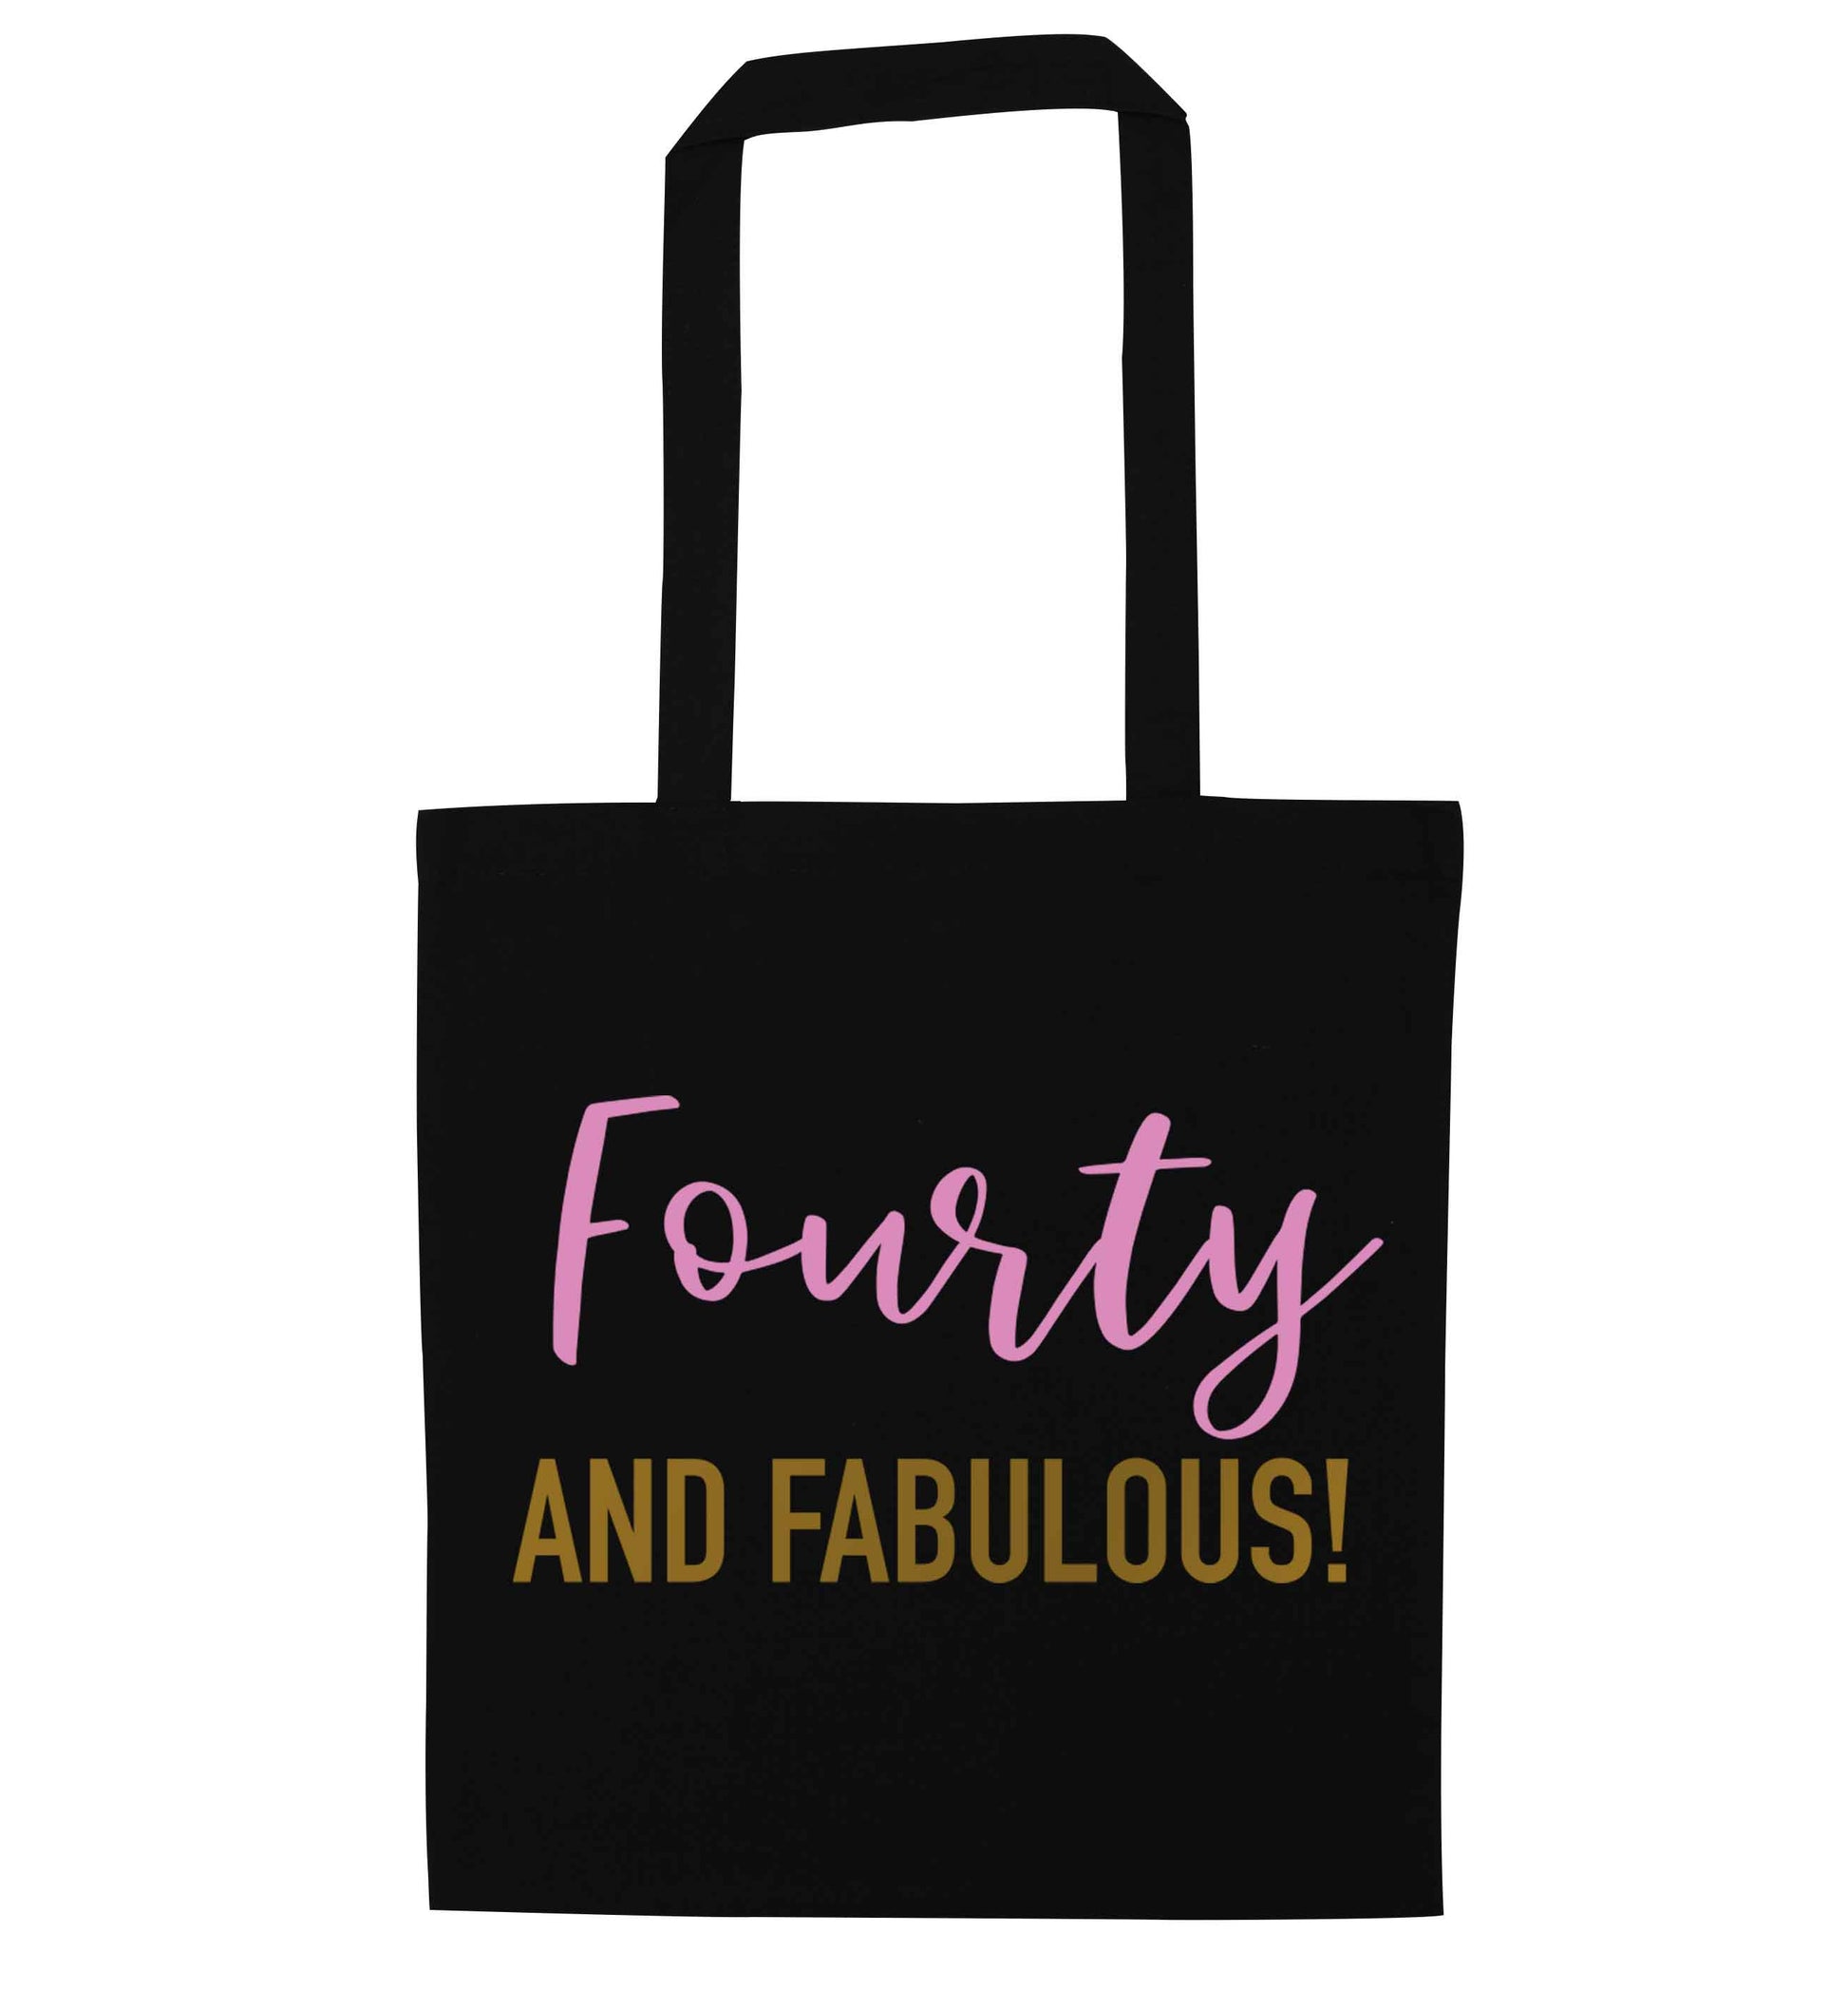 Fourty and fabulous black tote bag